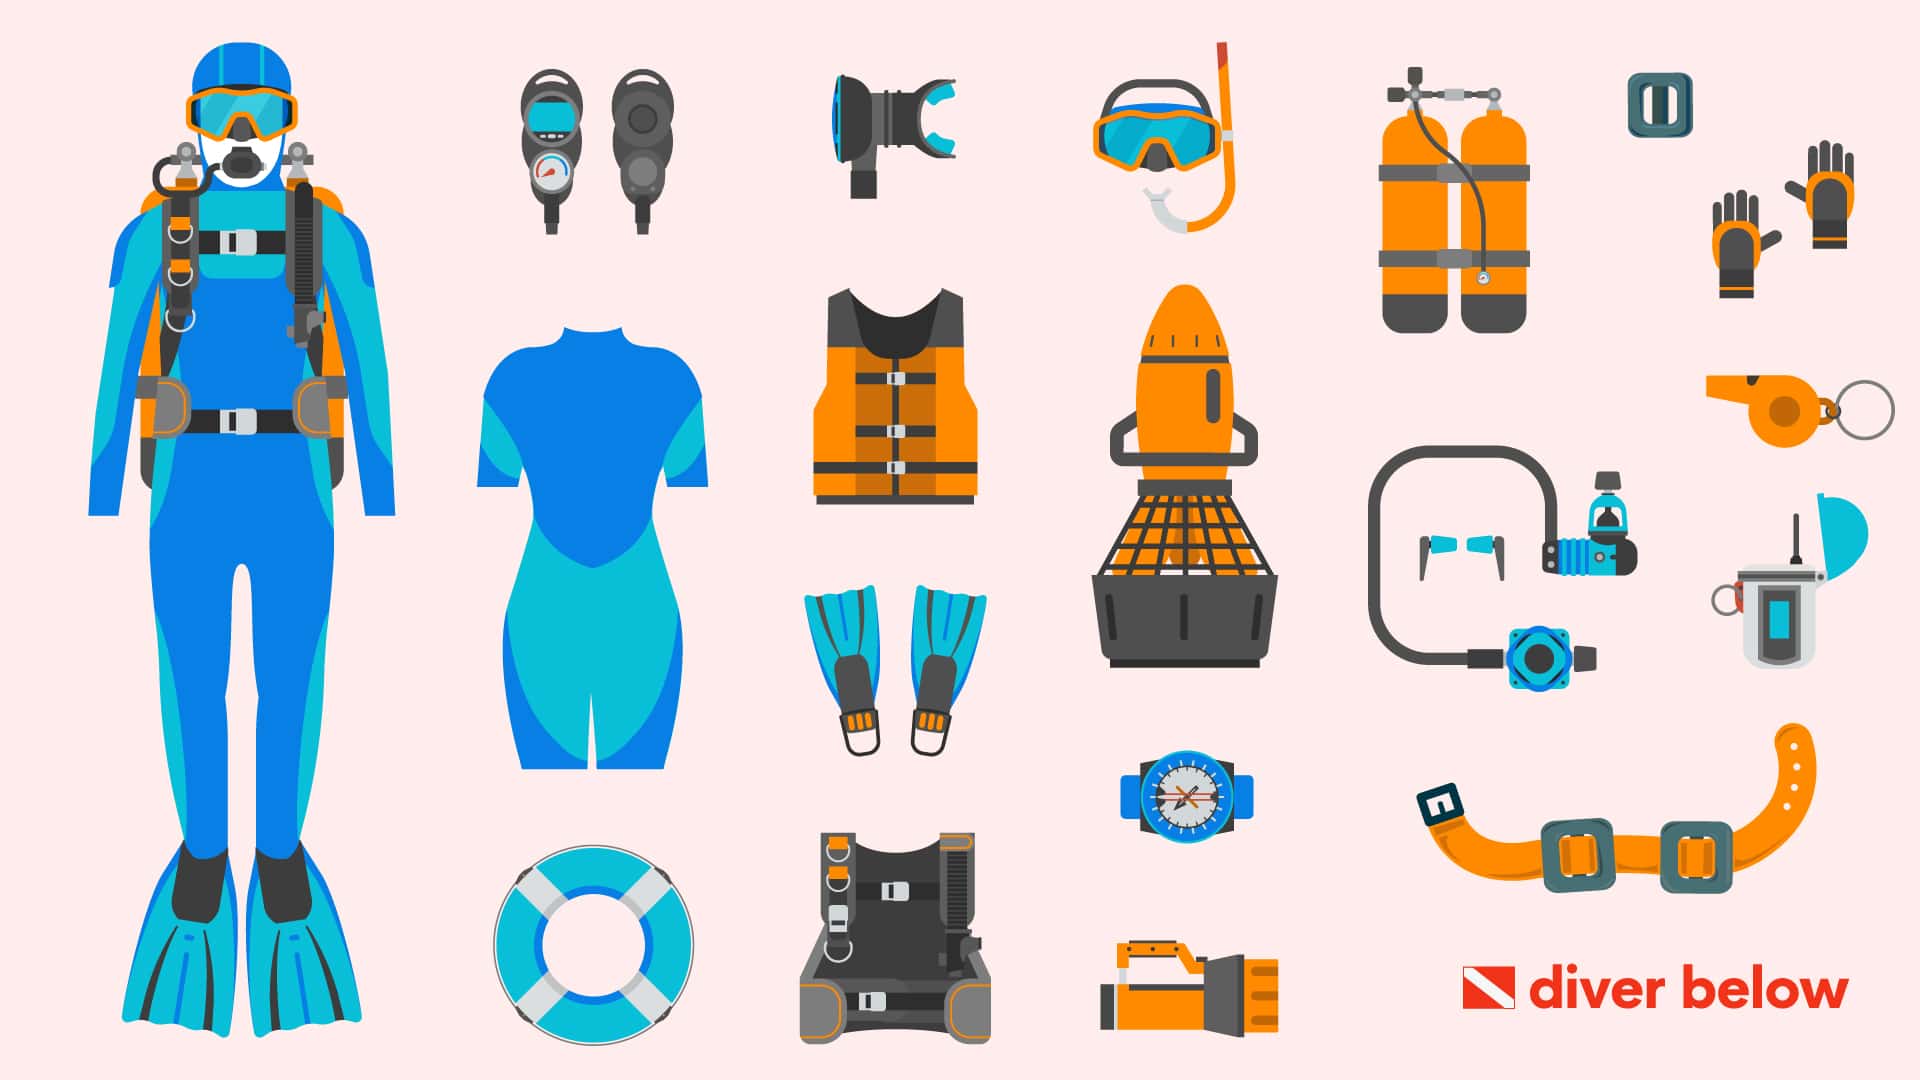 custom vector graphic showing the scuba gear needed to go diving